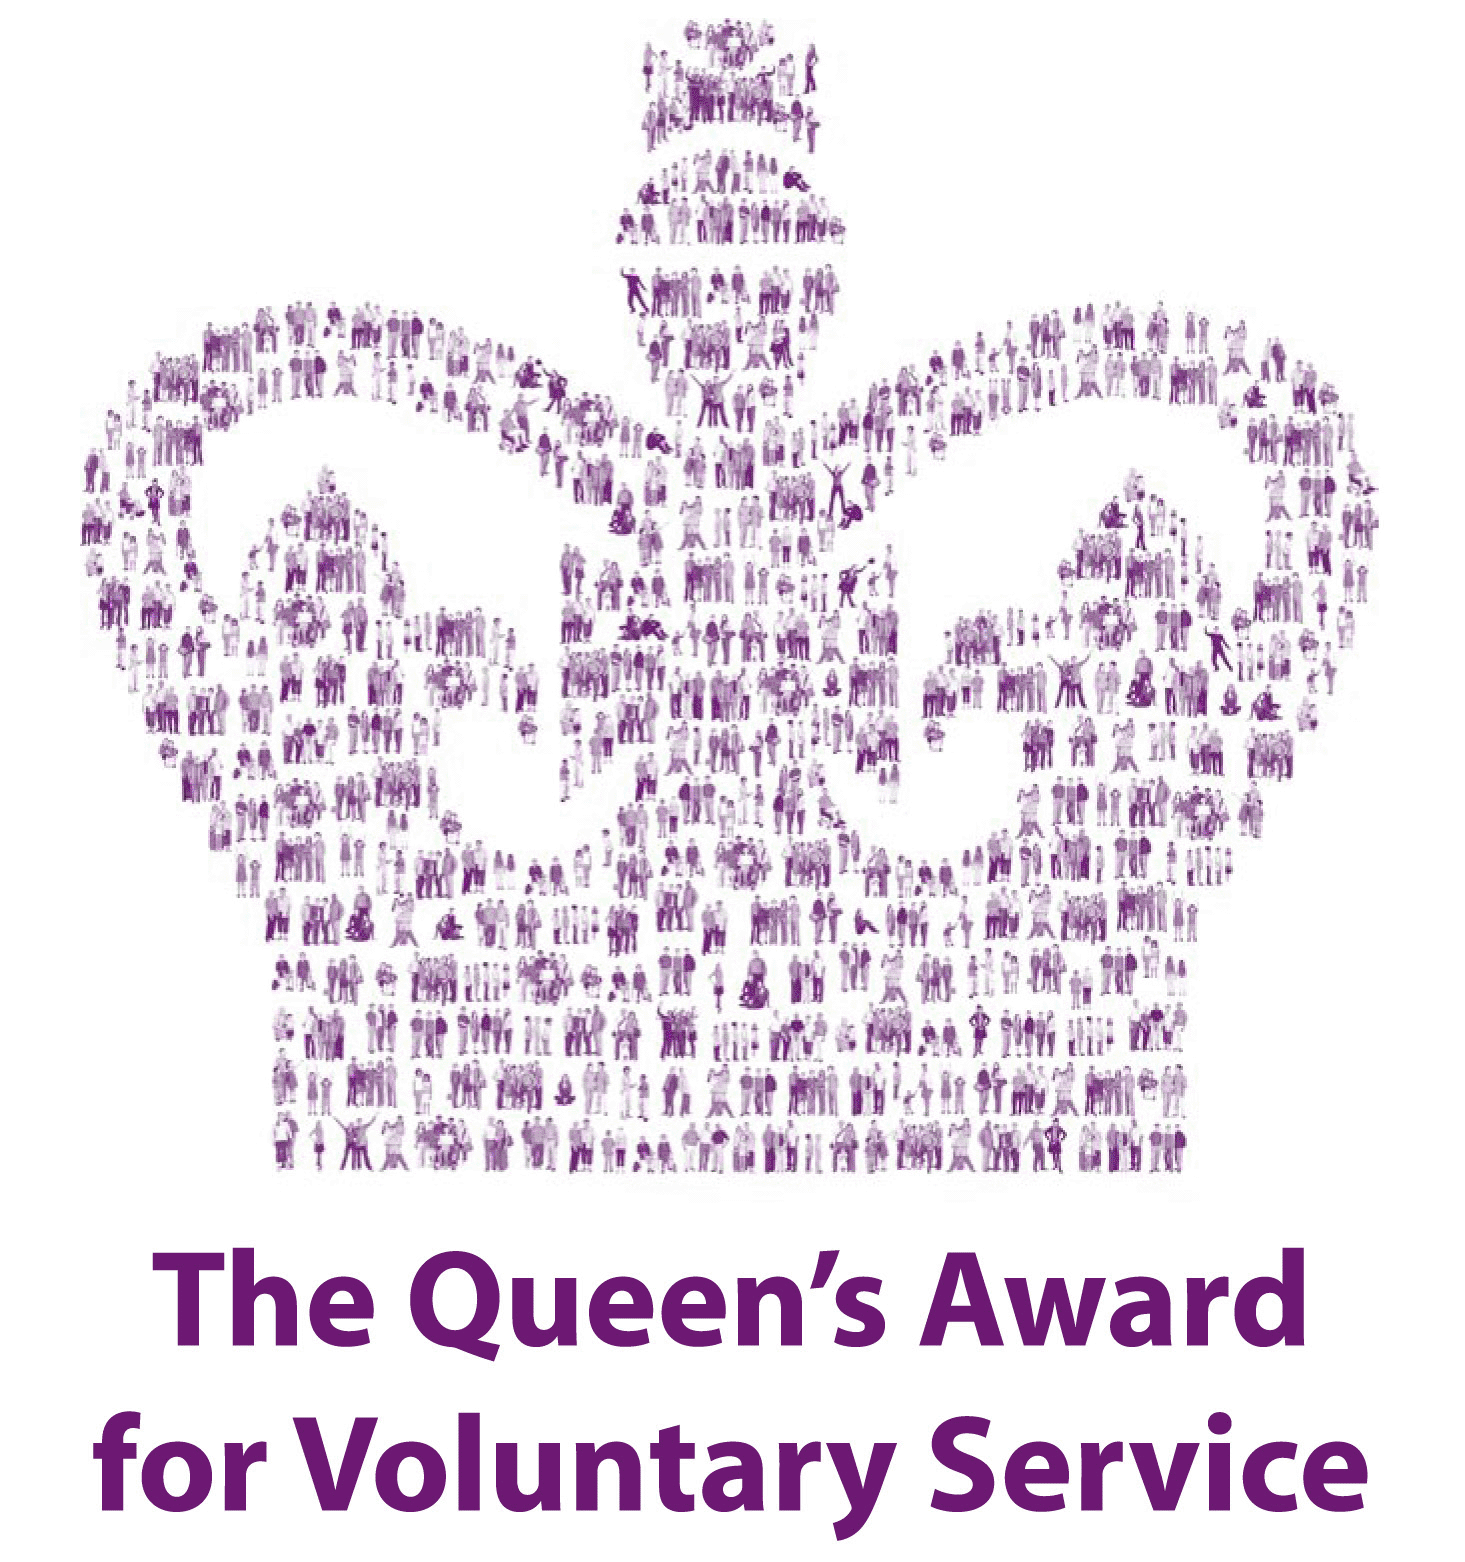 Nominate for The Queen’s Award for Voluntary Service 2019